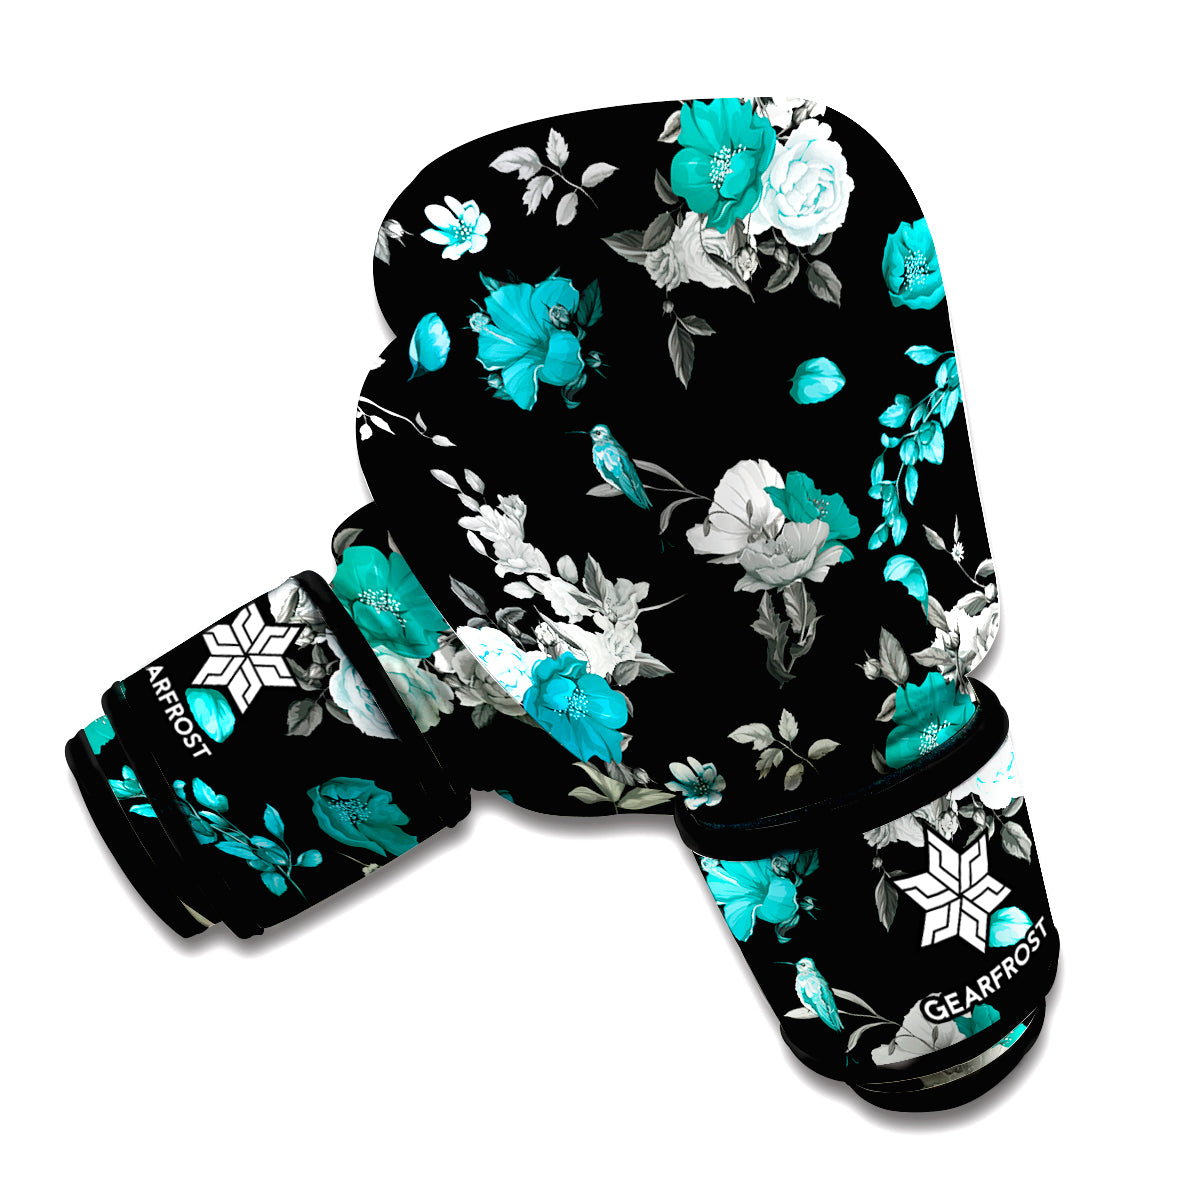 Blue Peony And Grey Rose Floral Print Boxing Gloves